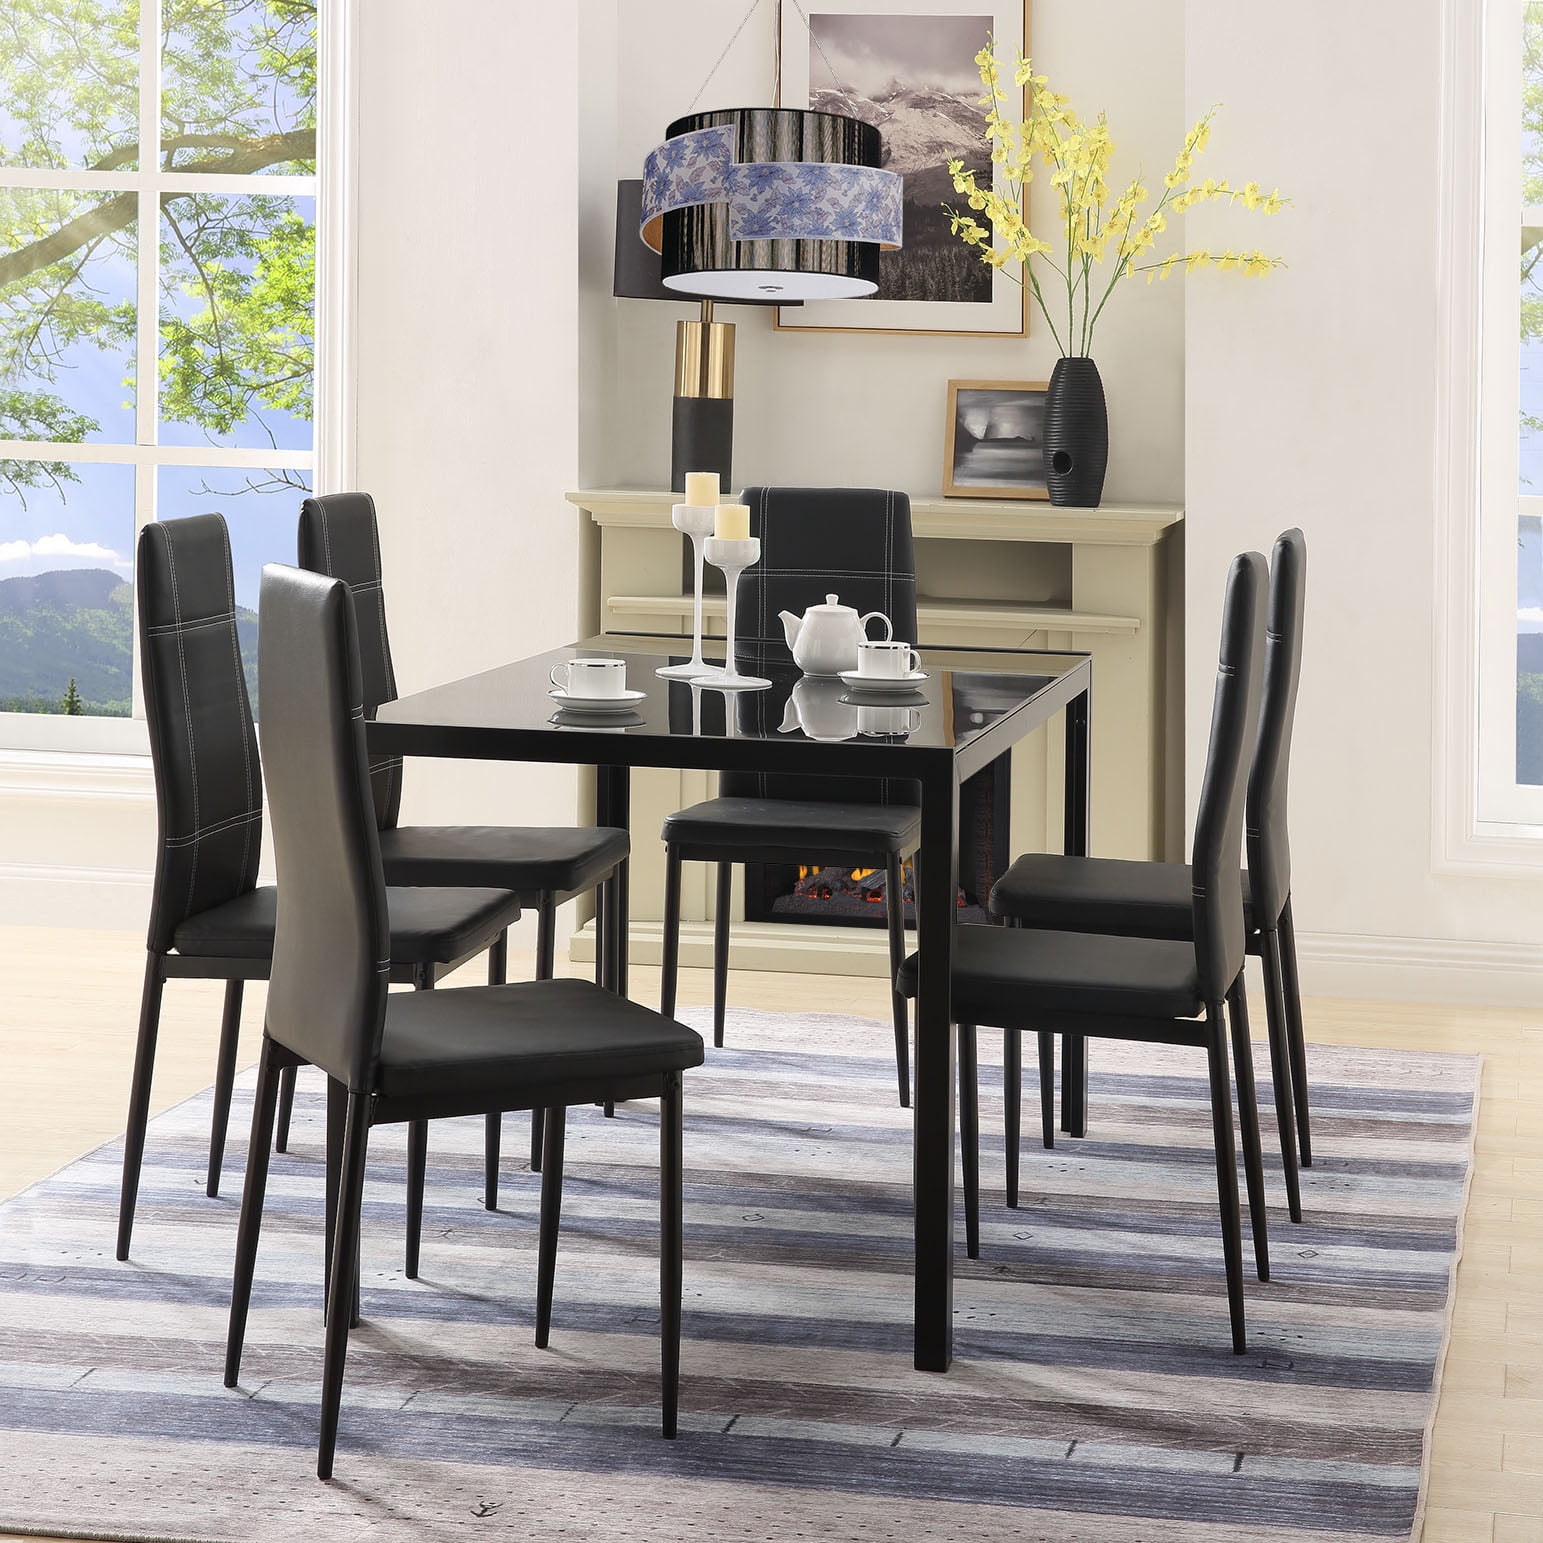 Metal Dining Table Set With 6 Chairs, Modern Glass Dining Room Set